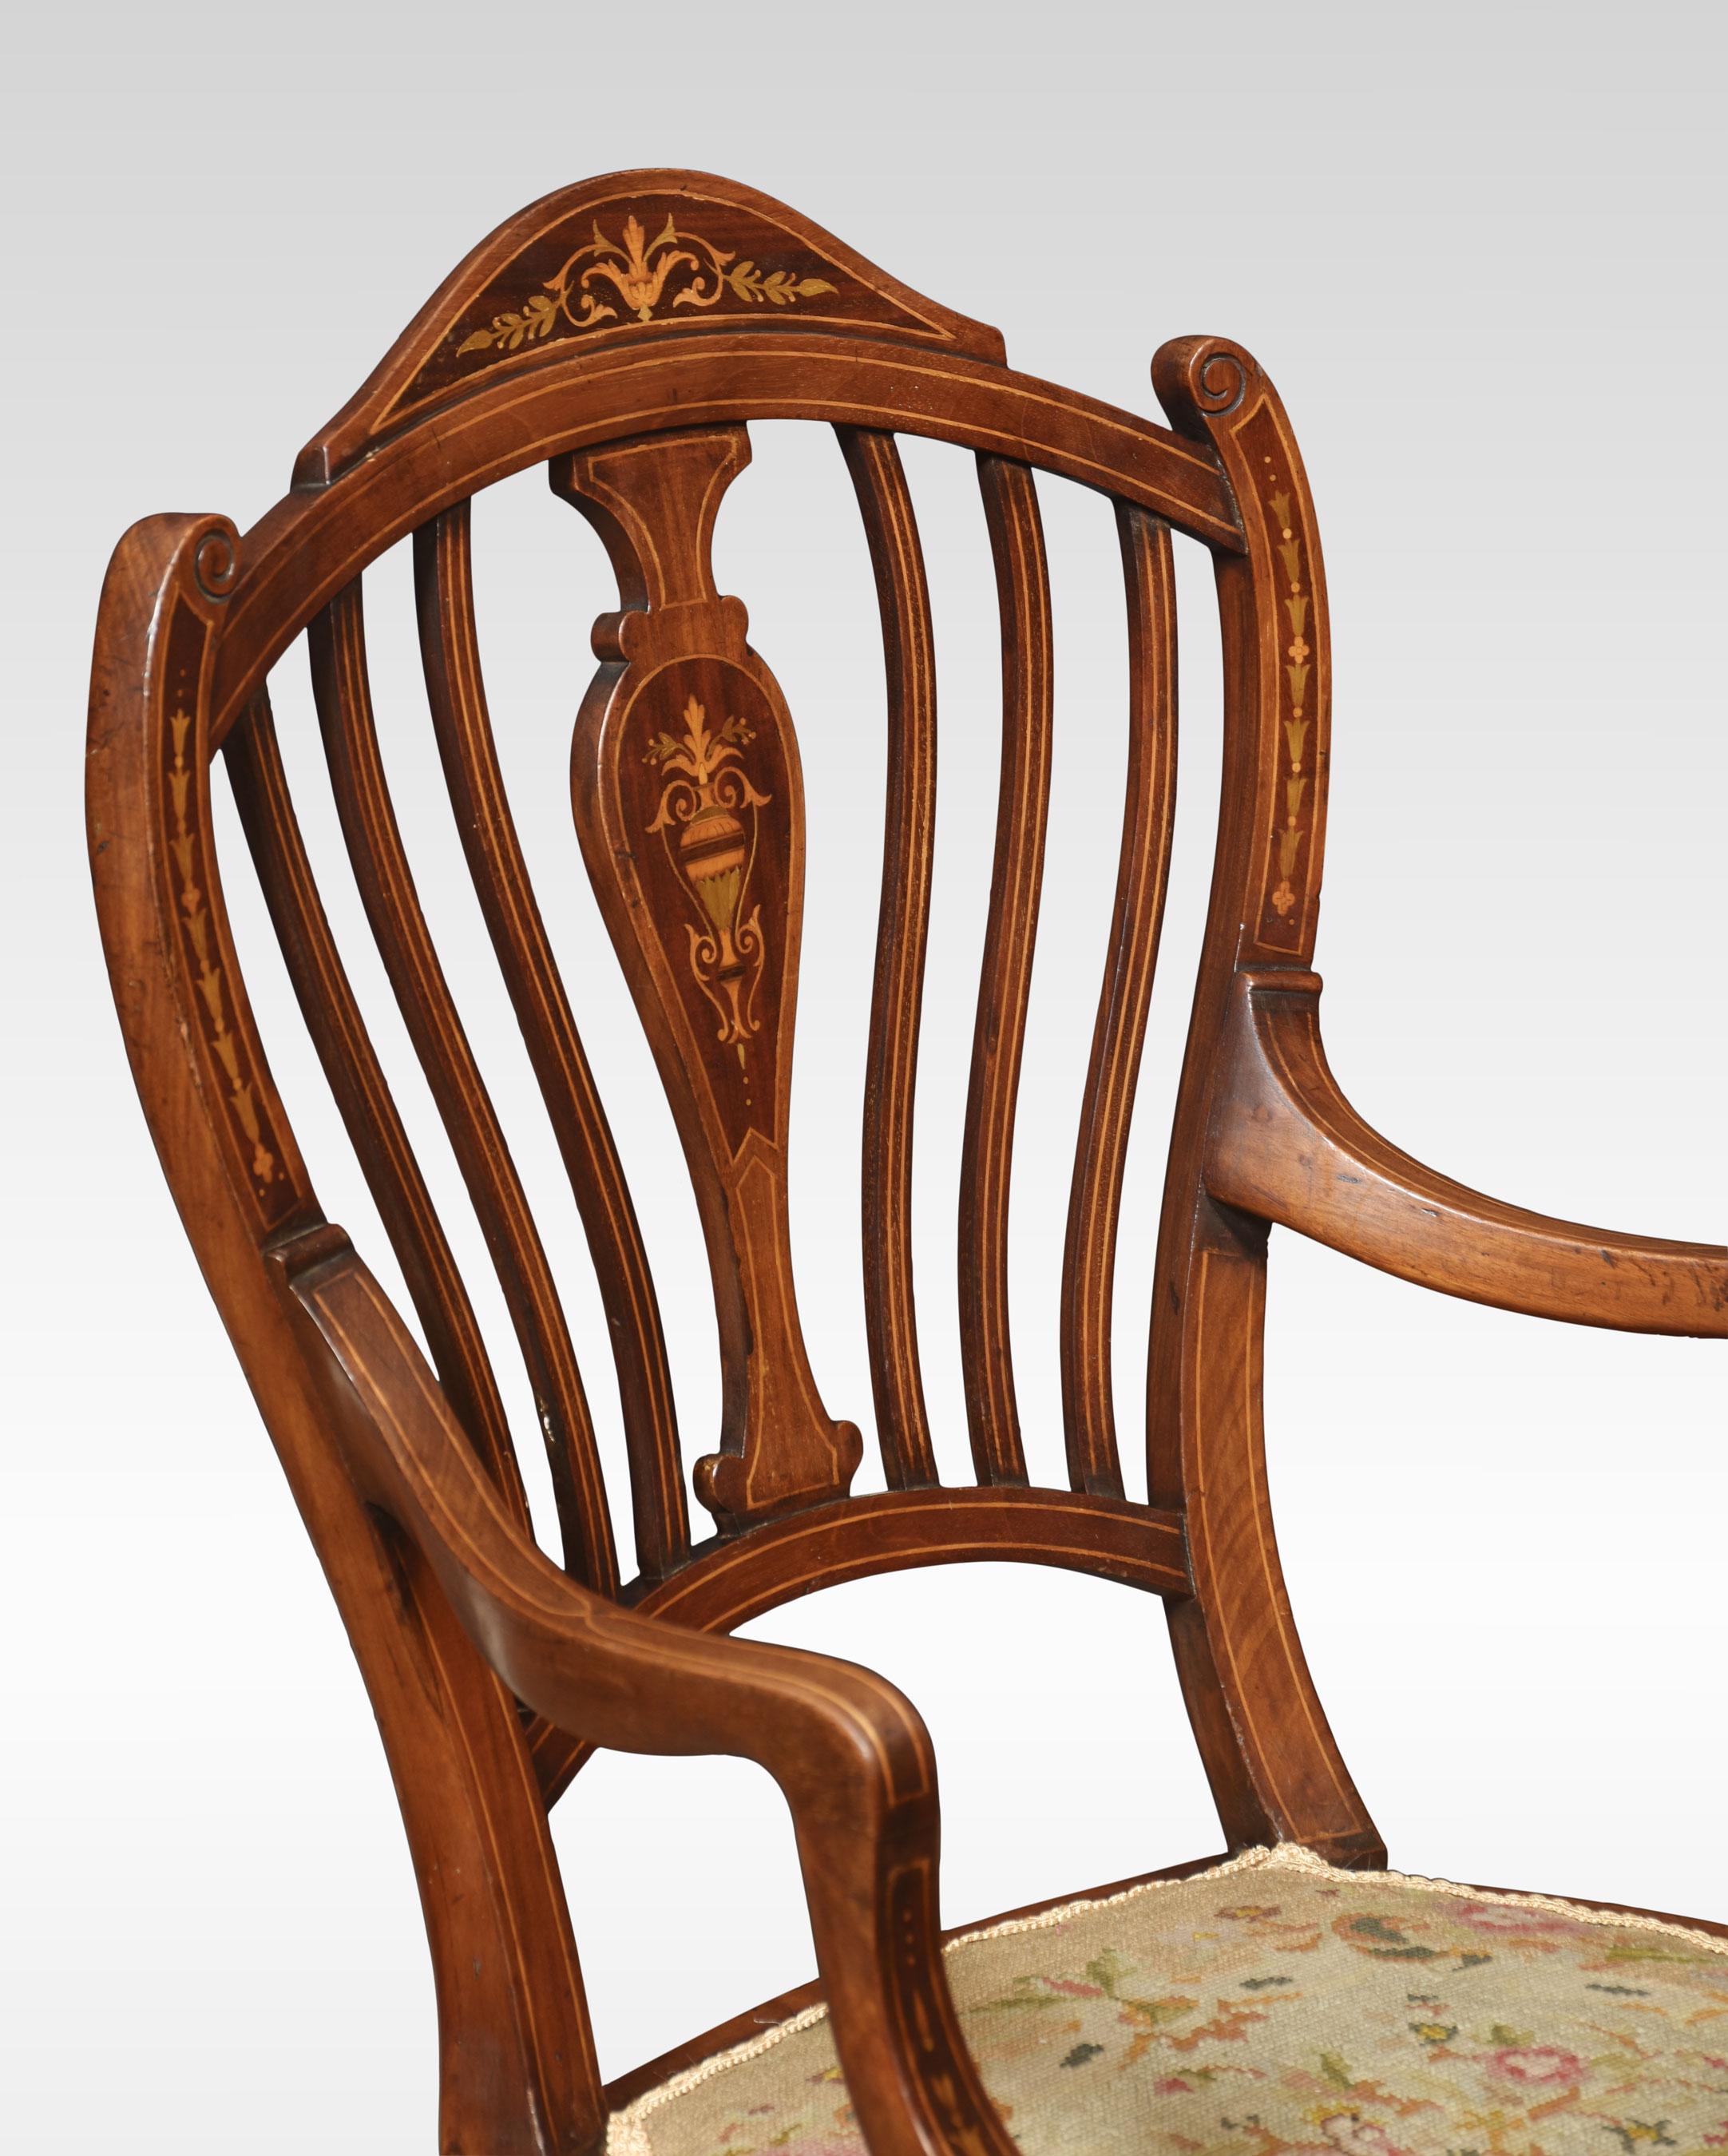 Mahogany inlaid armchair, having shaped back with central inlay, to the needlepoint seat. All raised up on tapering front legs terminating in spade feet.
Dimensions
Height 37.5 Inches height to seat 17.5 Inches
Width 22 Inches
Depth 22.5 Inches